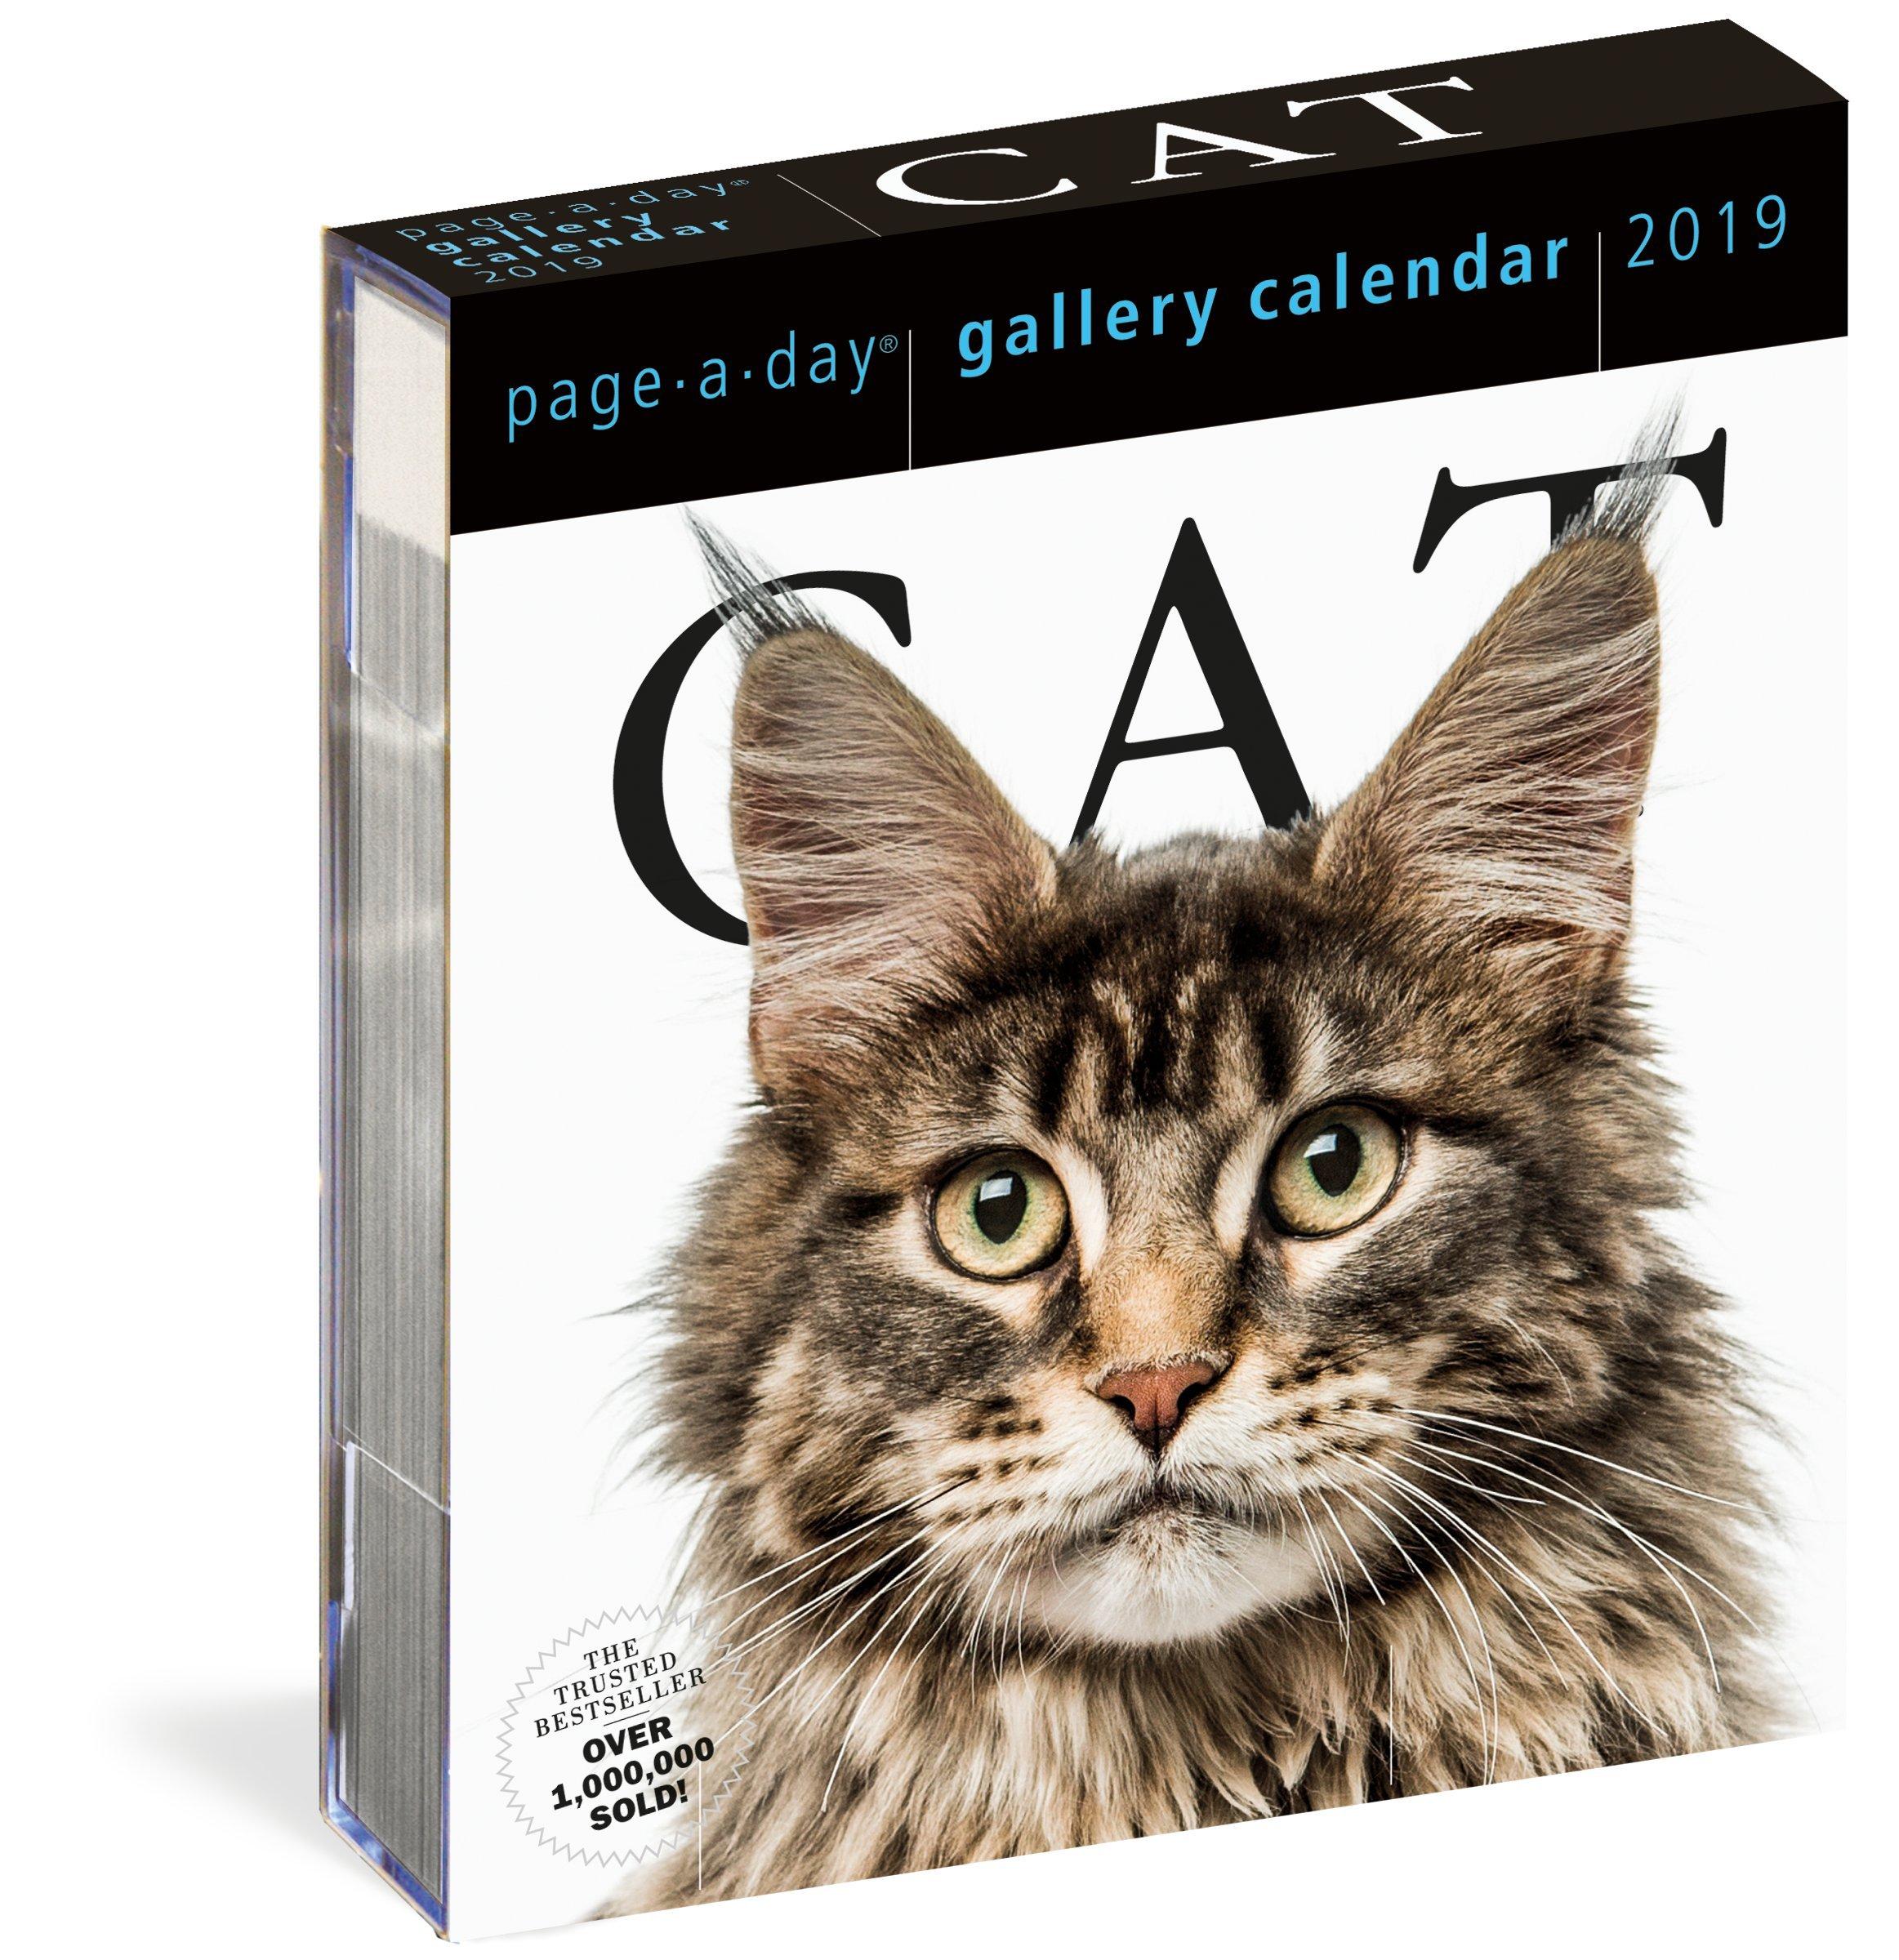 2019 Page-A-Day Gallery: Cat